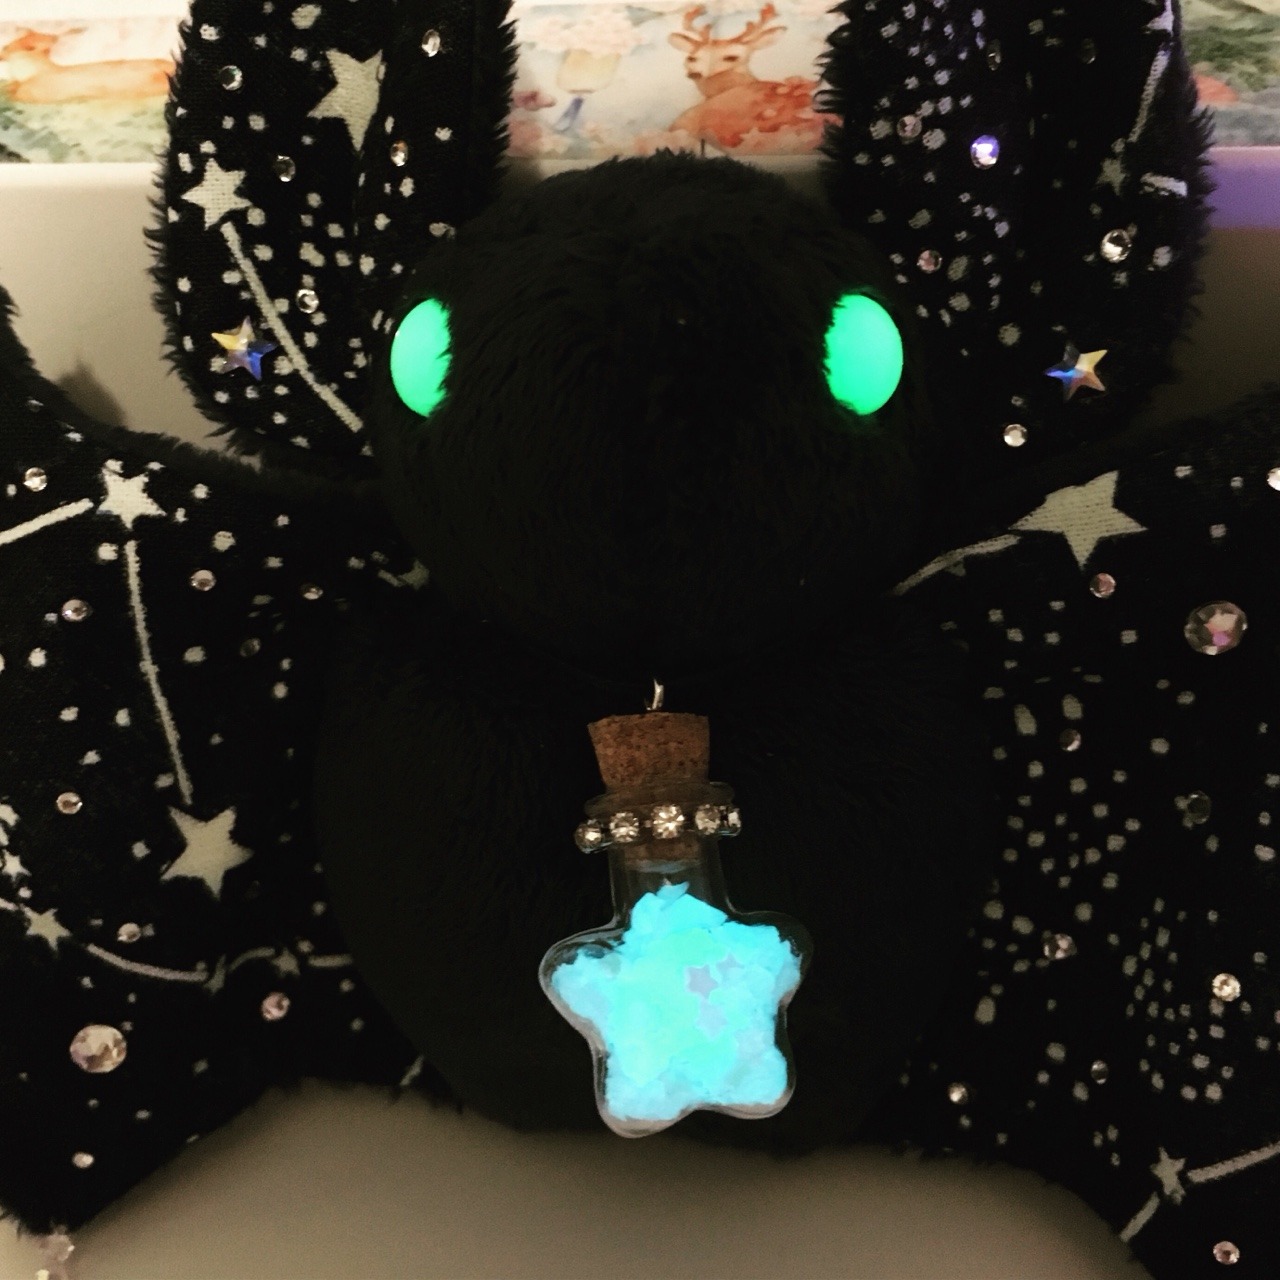 3 Sizes Plush Bat Made to Order Glow in the Dark Constellations